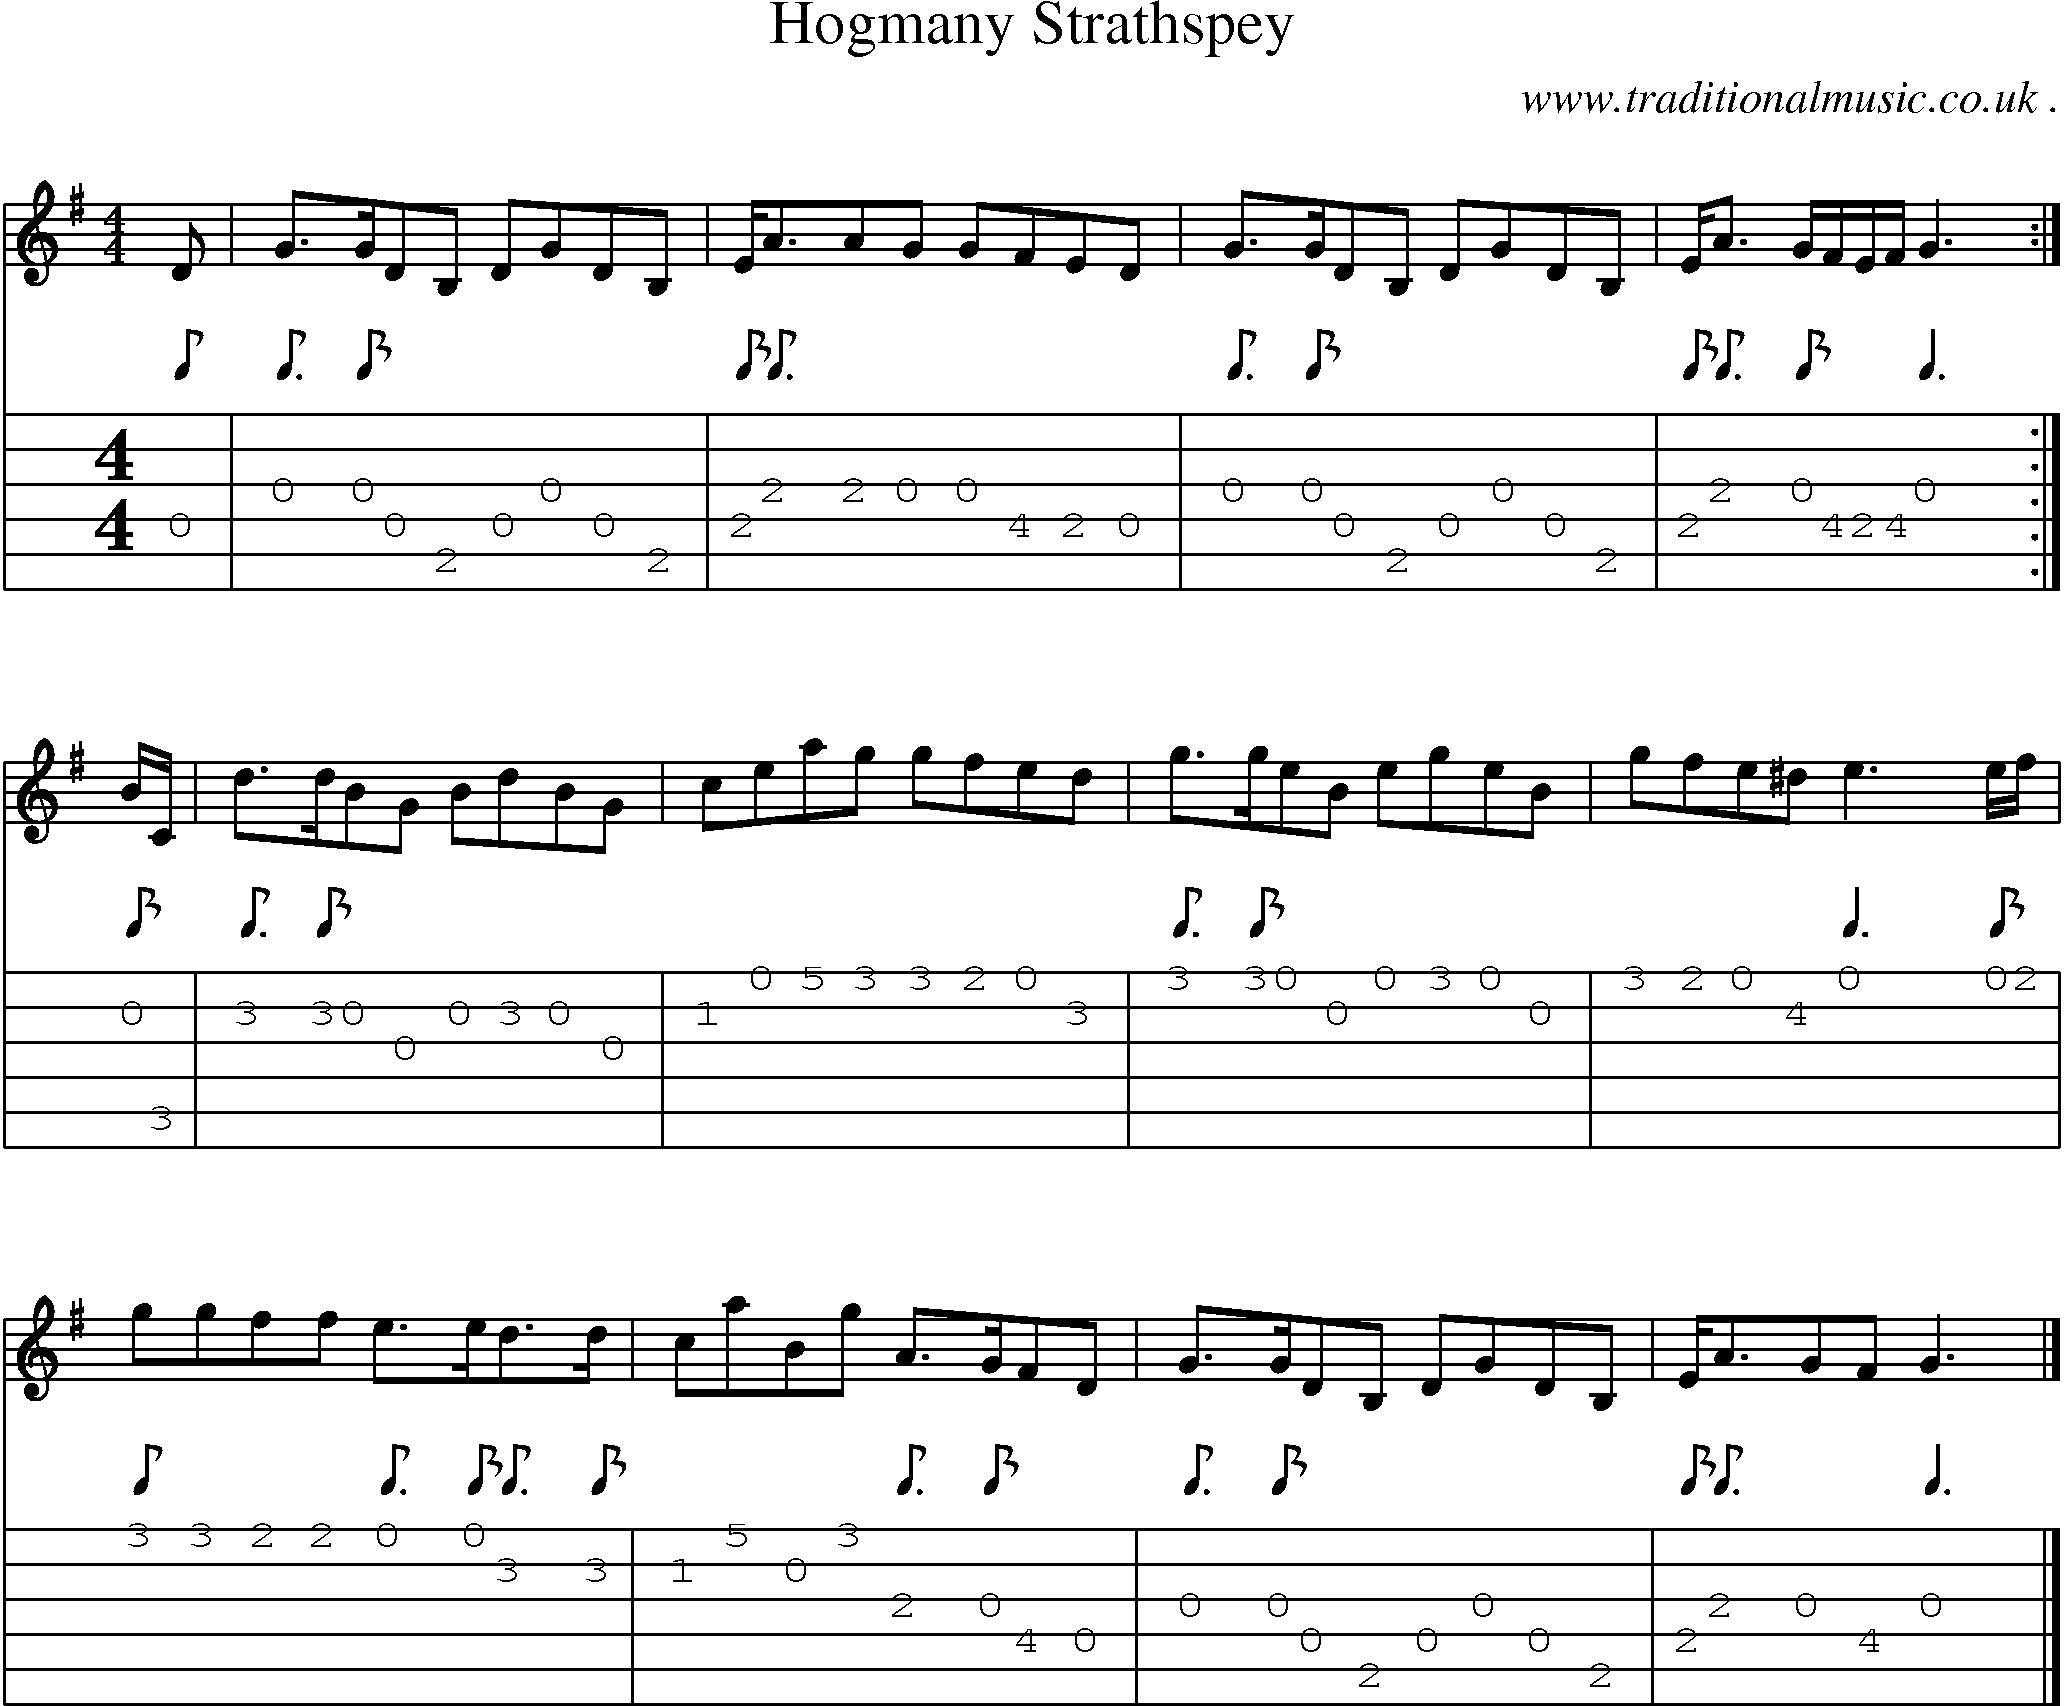 Sheet-music  score, Chords and Guitar Tabs for Hogmany Strathspey